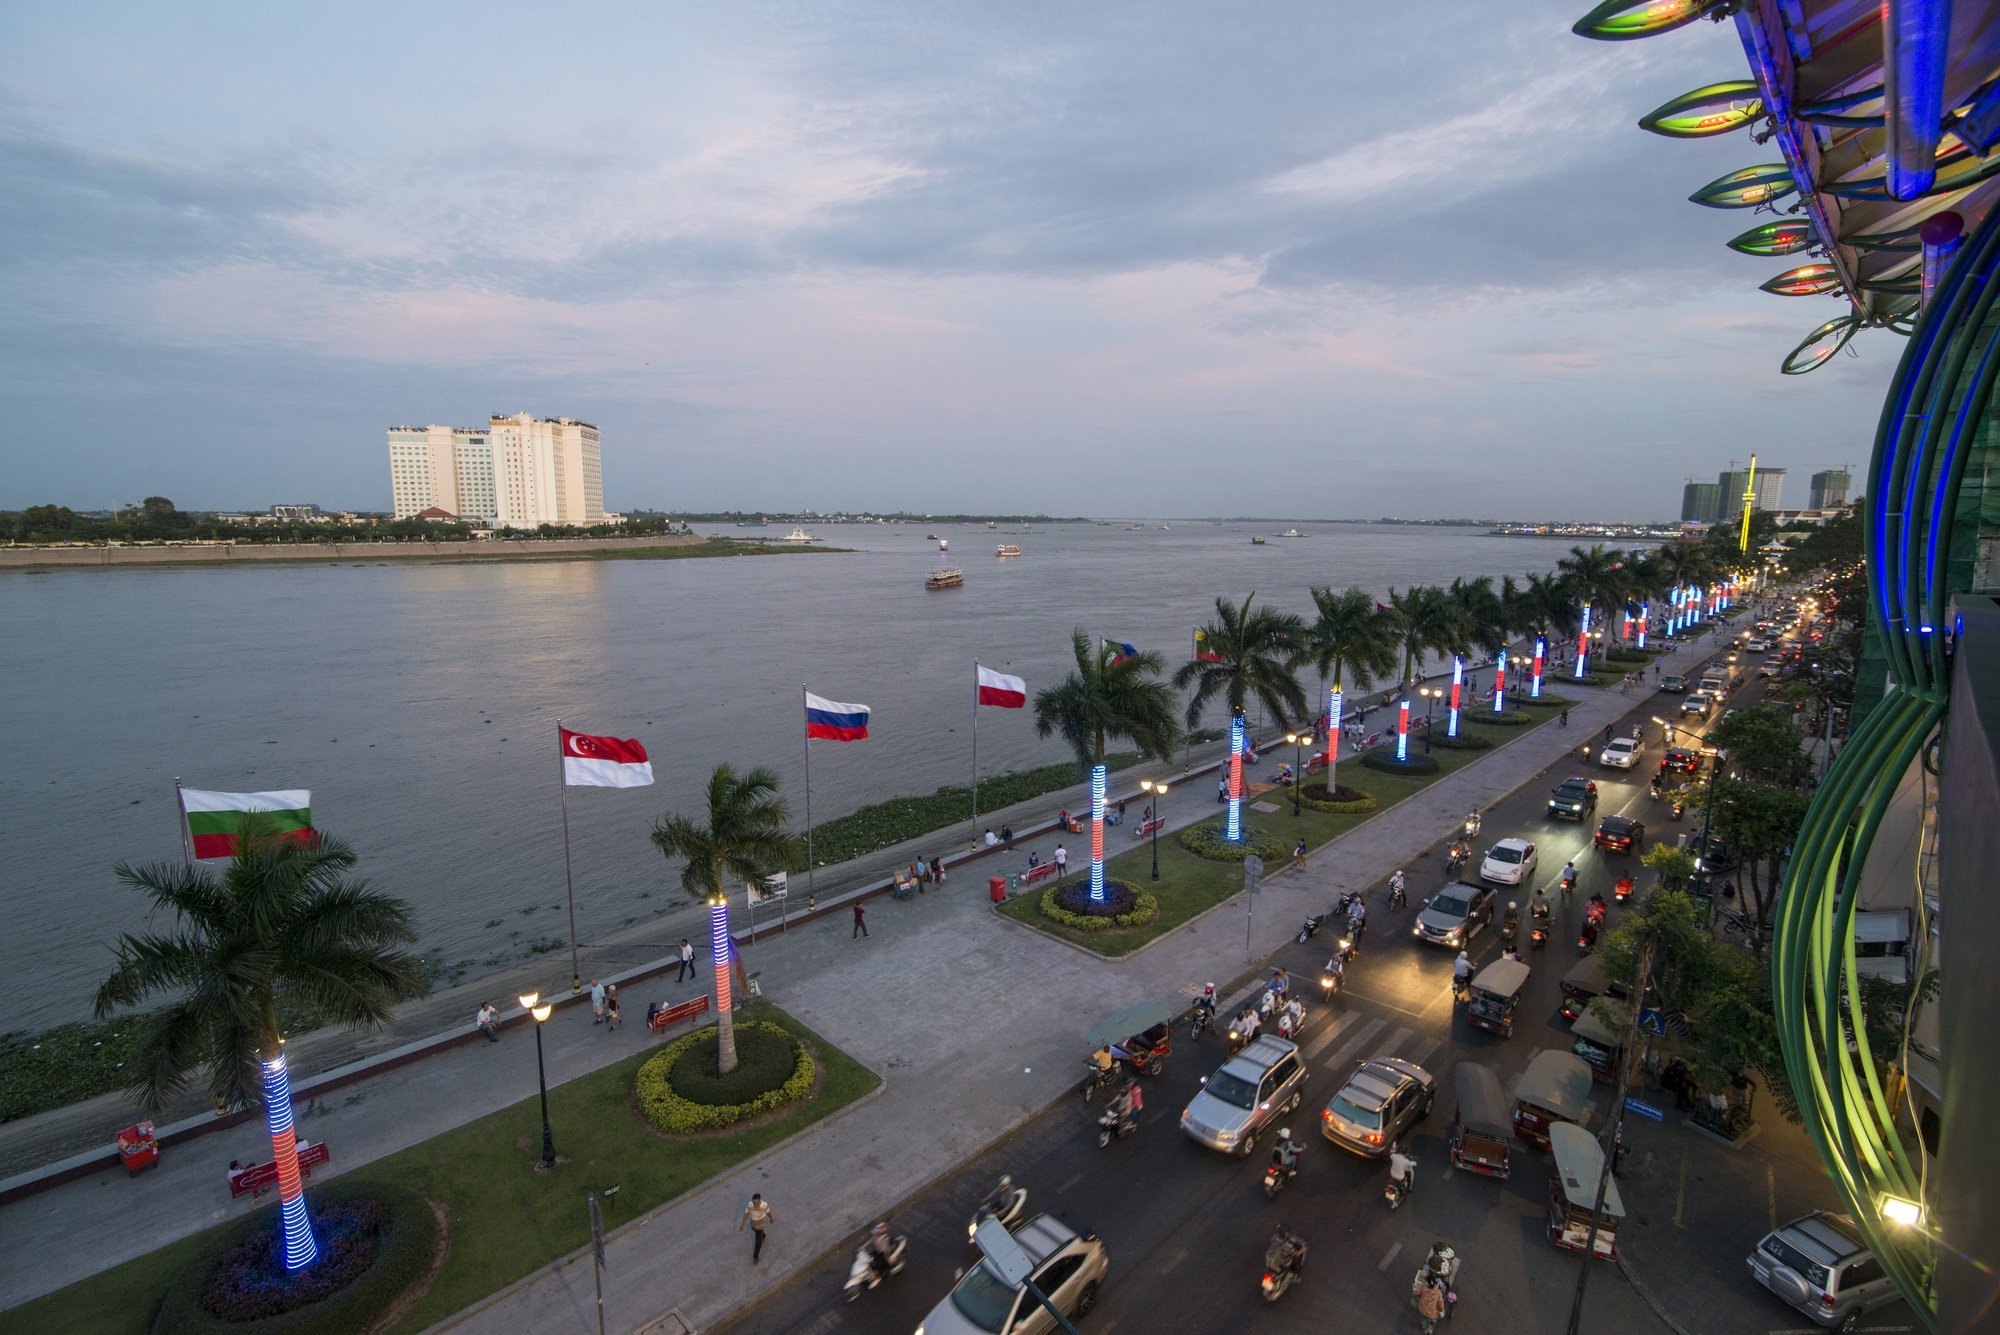 View of the Tonle Sap River along the Sisowath Quay